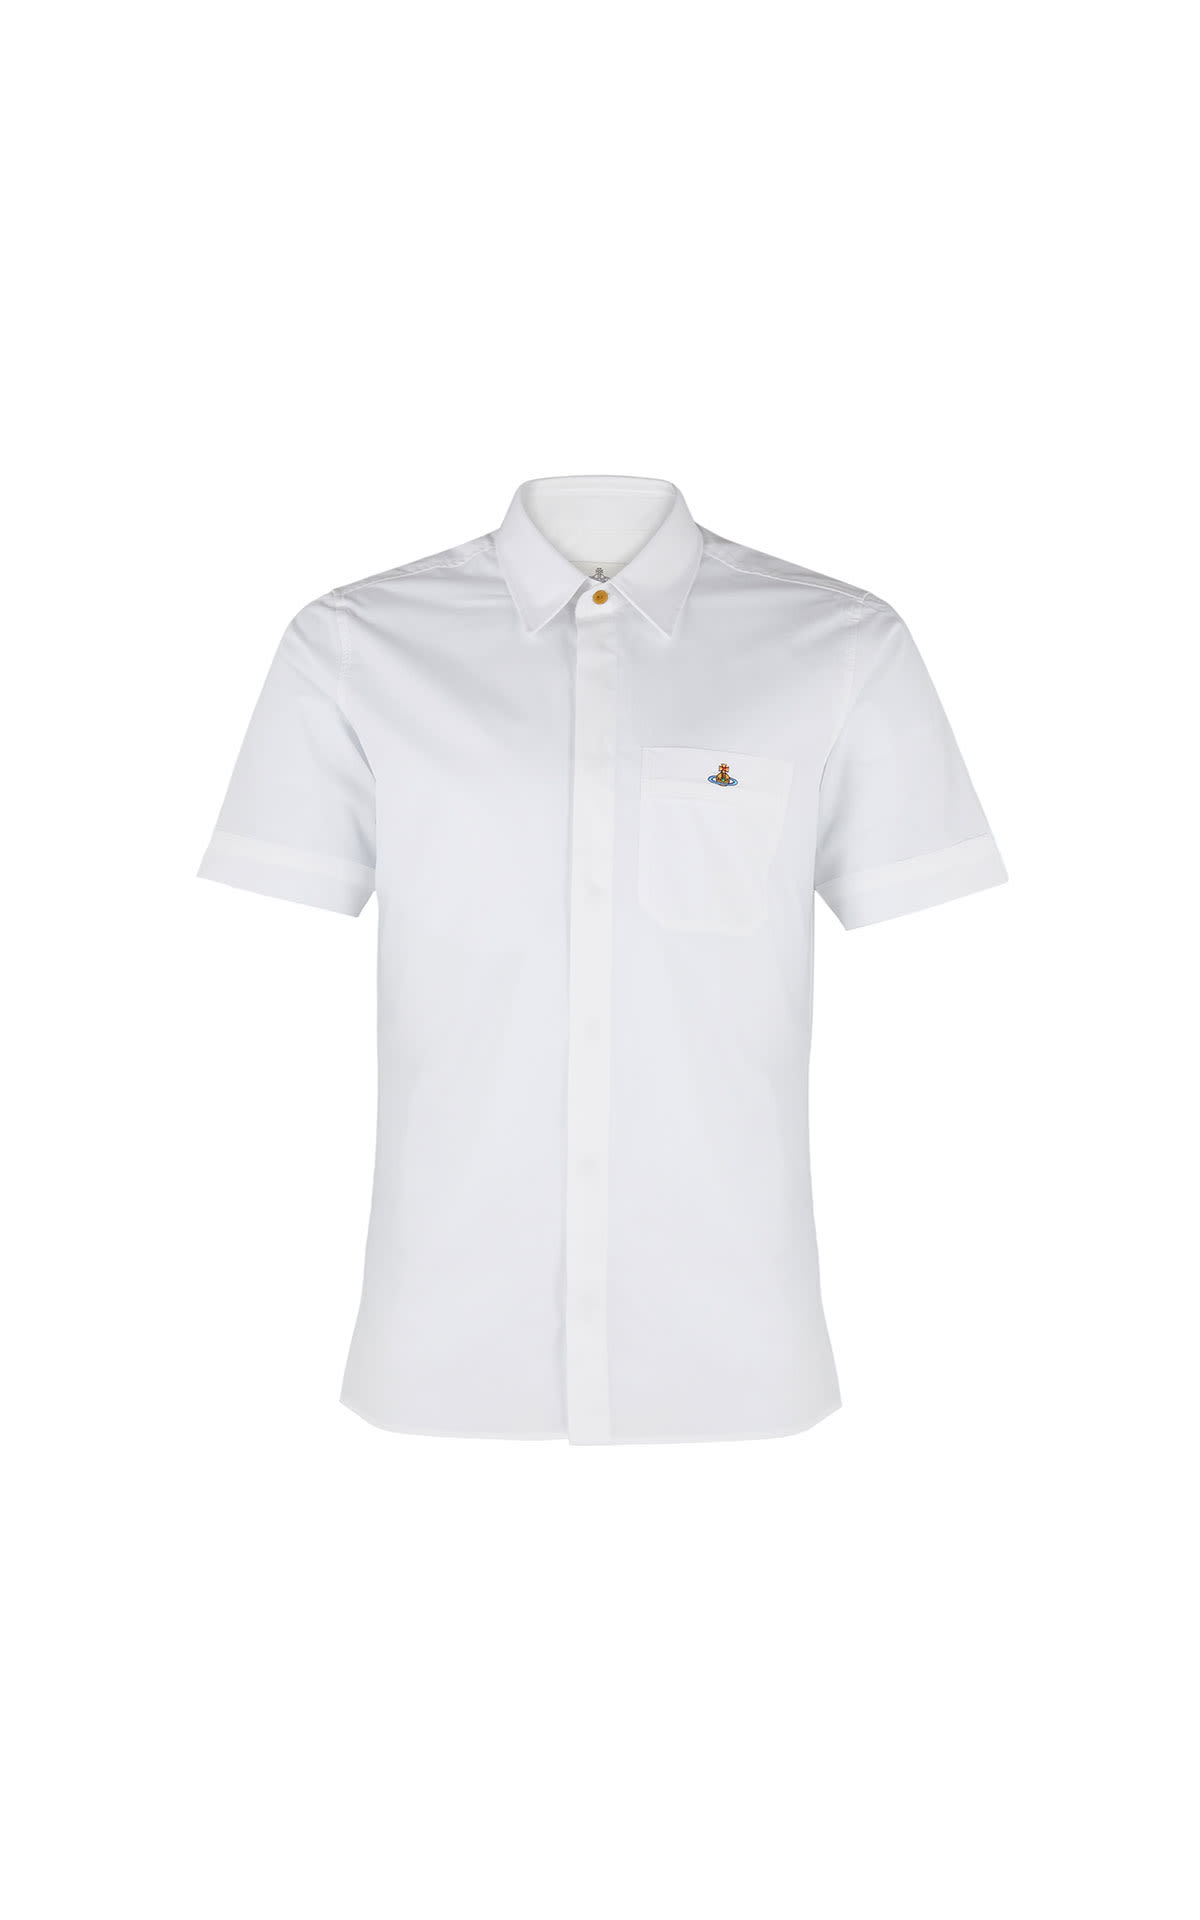 Vivienne Westwood Classic ss shirt from Bicester Village